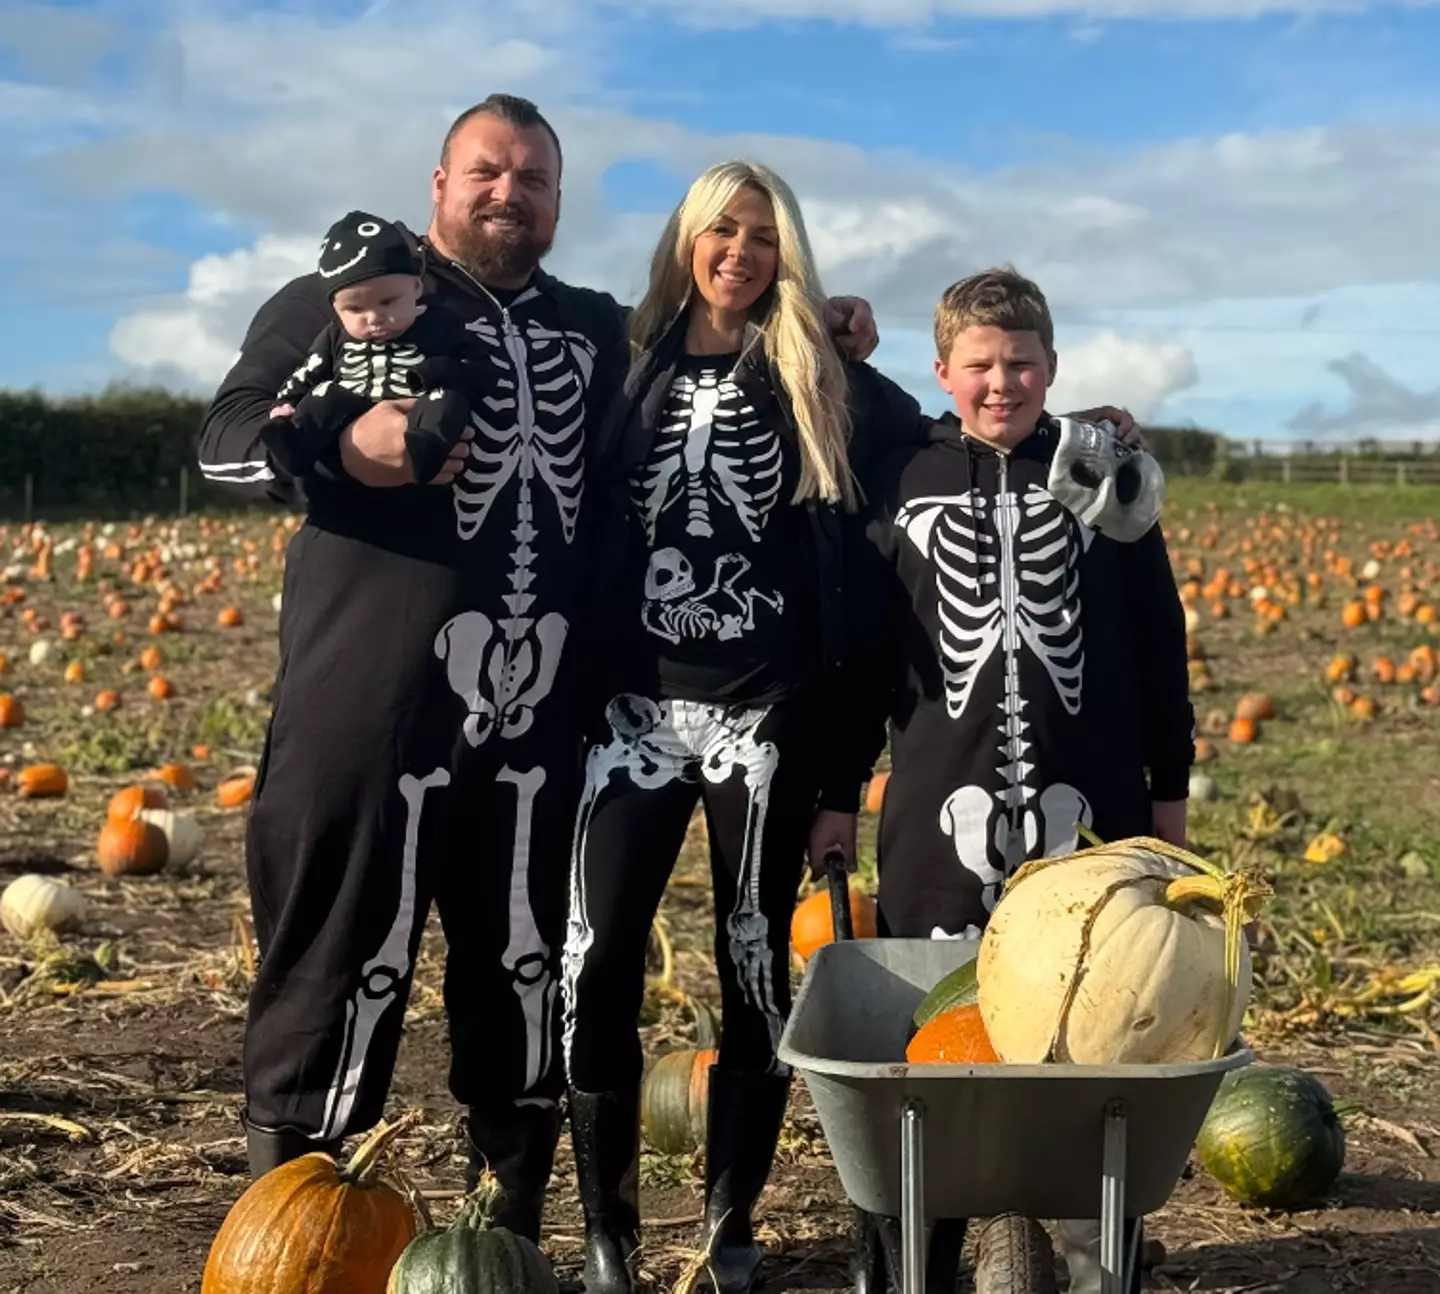 Eddie Hall and his family.